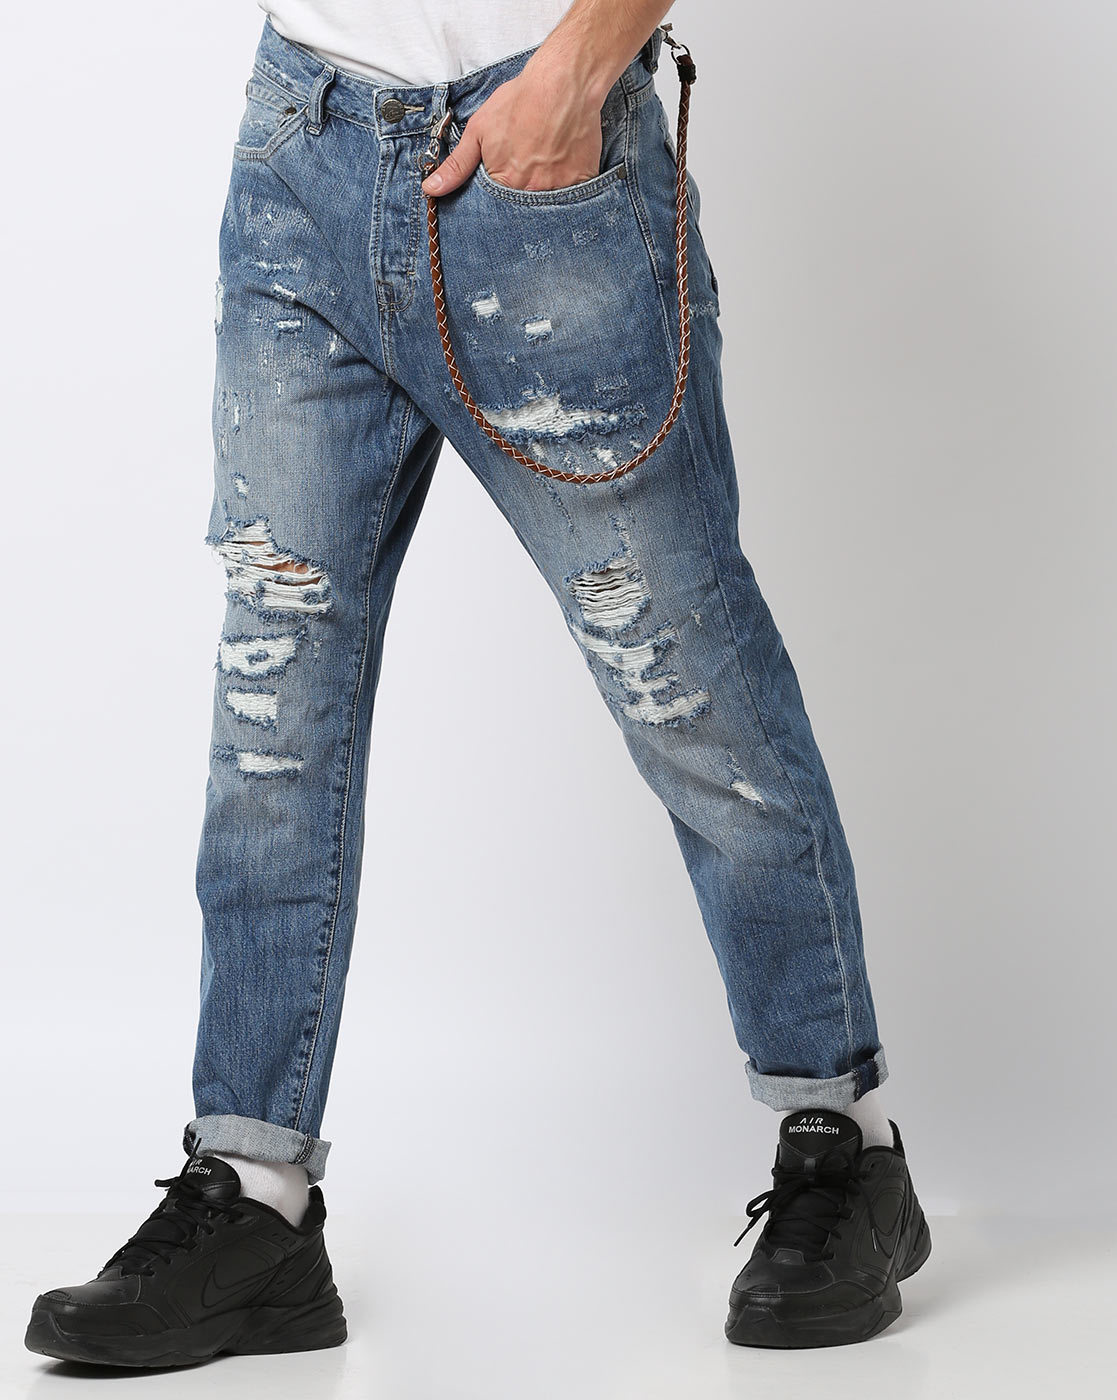 jack and jones fred jeans